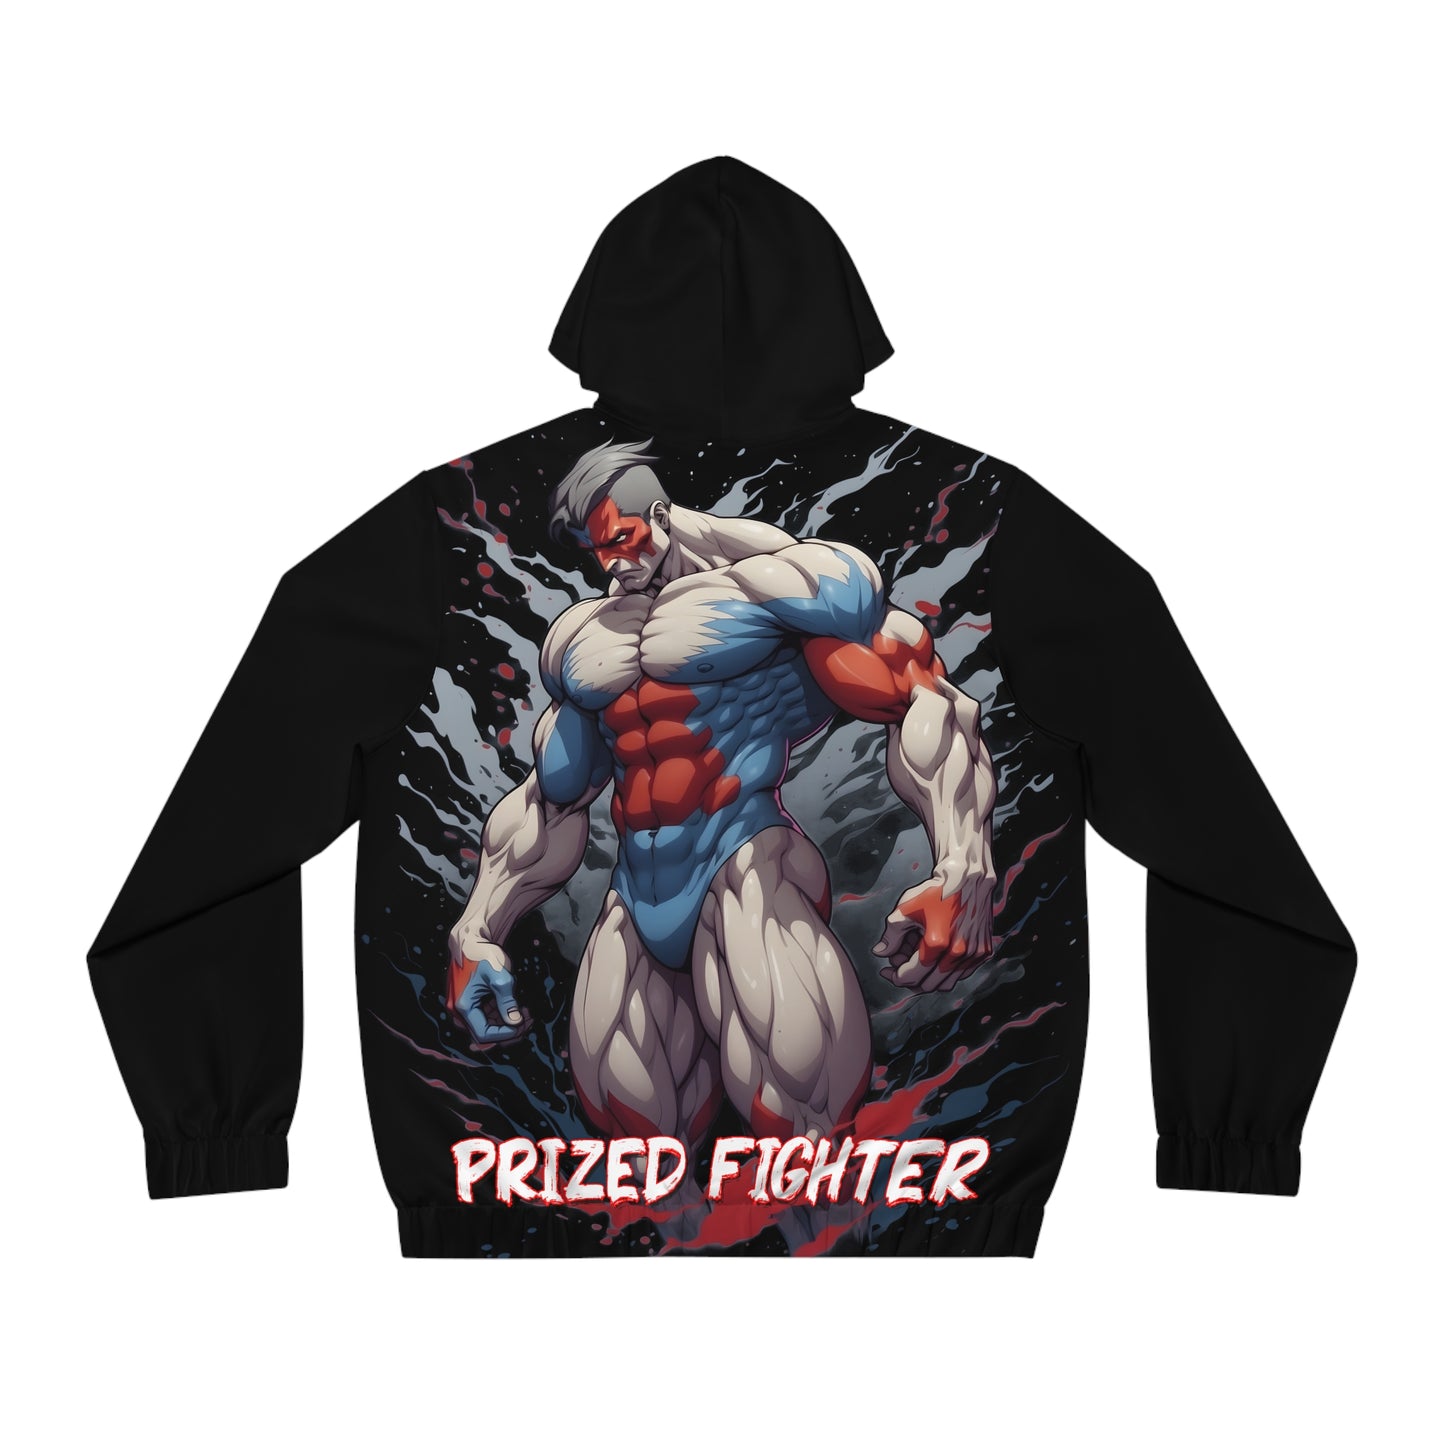 Kǎtōng Piàn - Prized Fighter Collection - America - 006 - Men's Full-Zip Hoodie